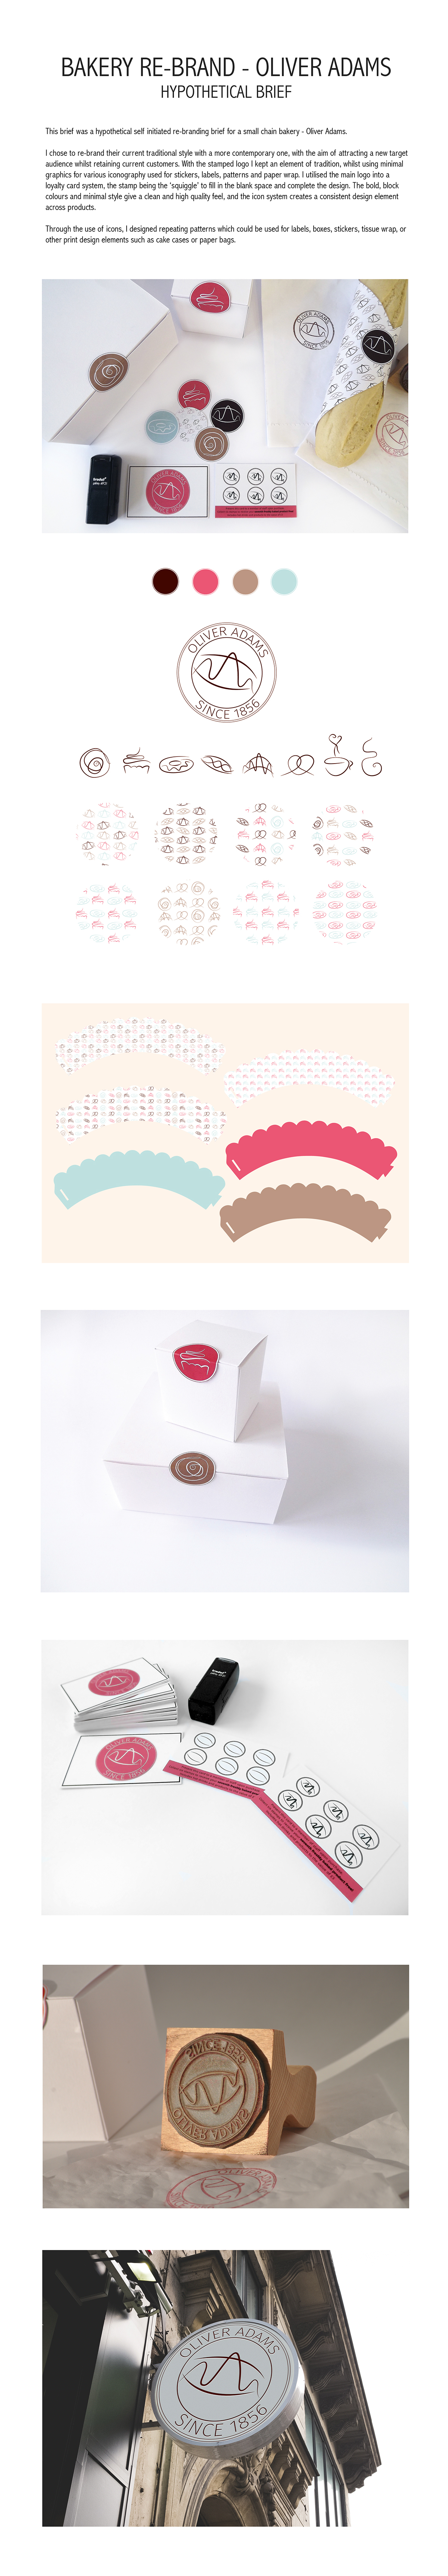 bakery brand pattern minimal modern contemporary icons iconography Hypothetical Rebrand traditional